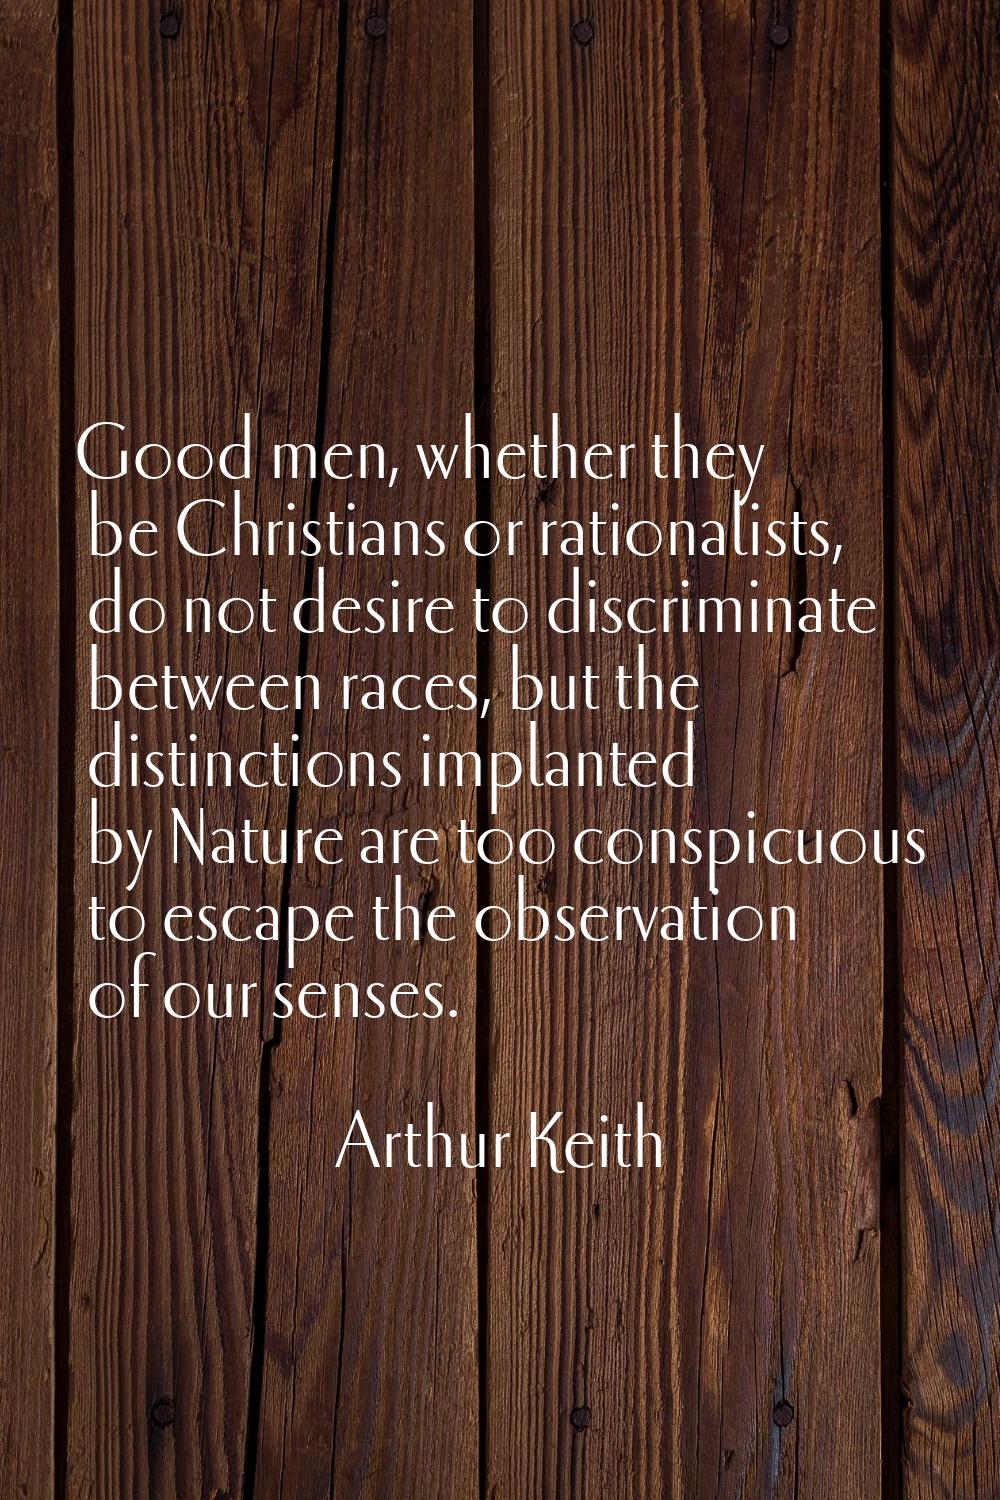 Good men, whether they be Christians or rationalists, do not desire to discriminate between races, 